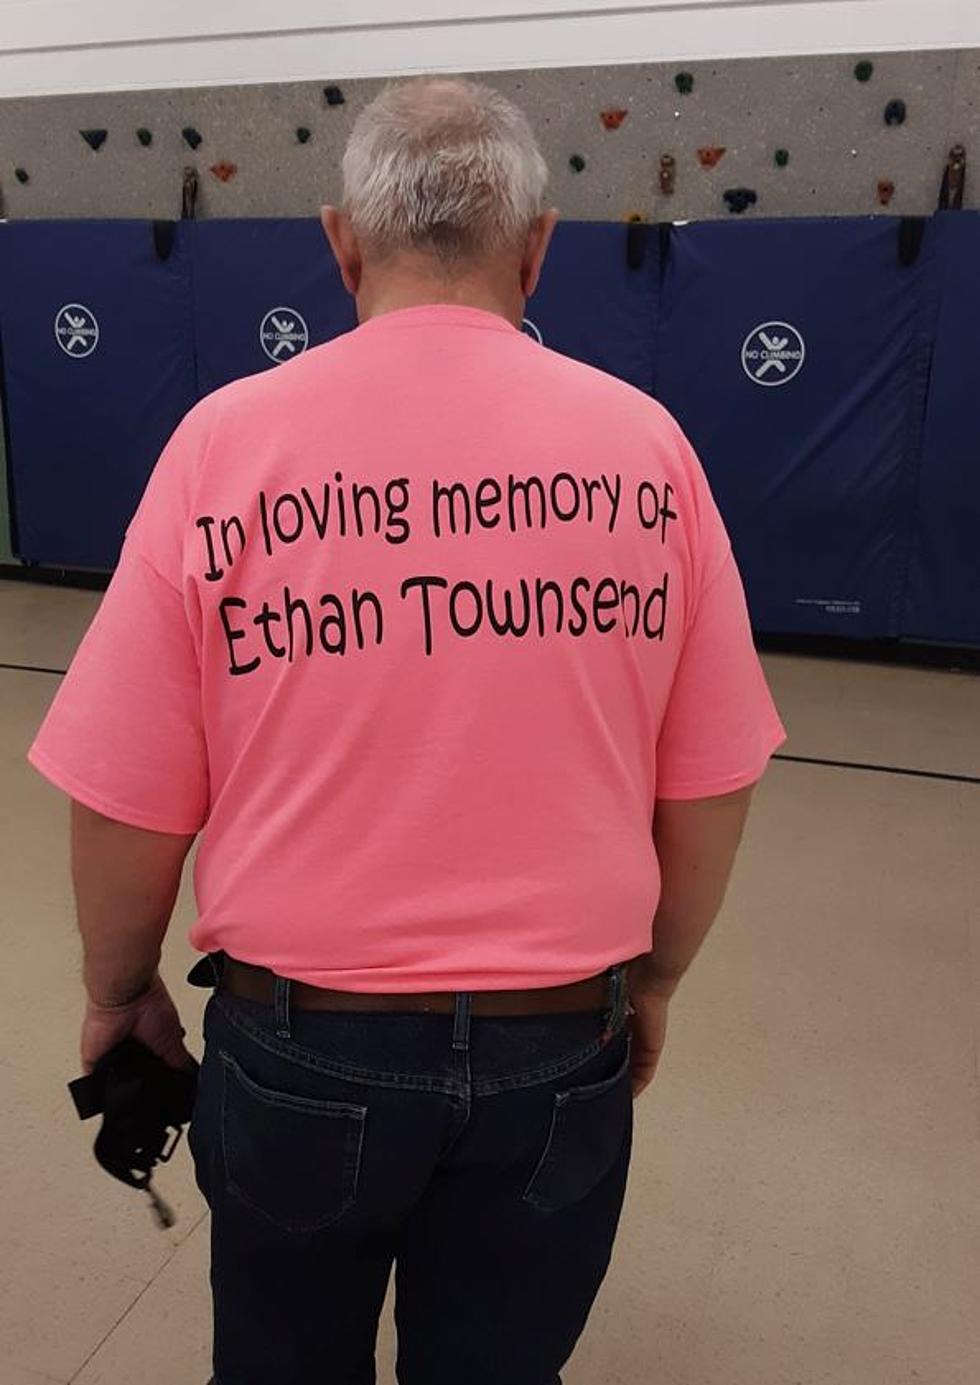 Fort Kent School & Neighbors Honor The Life Of Ethan Townsend